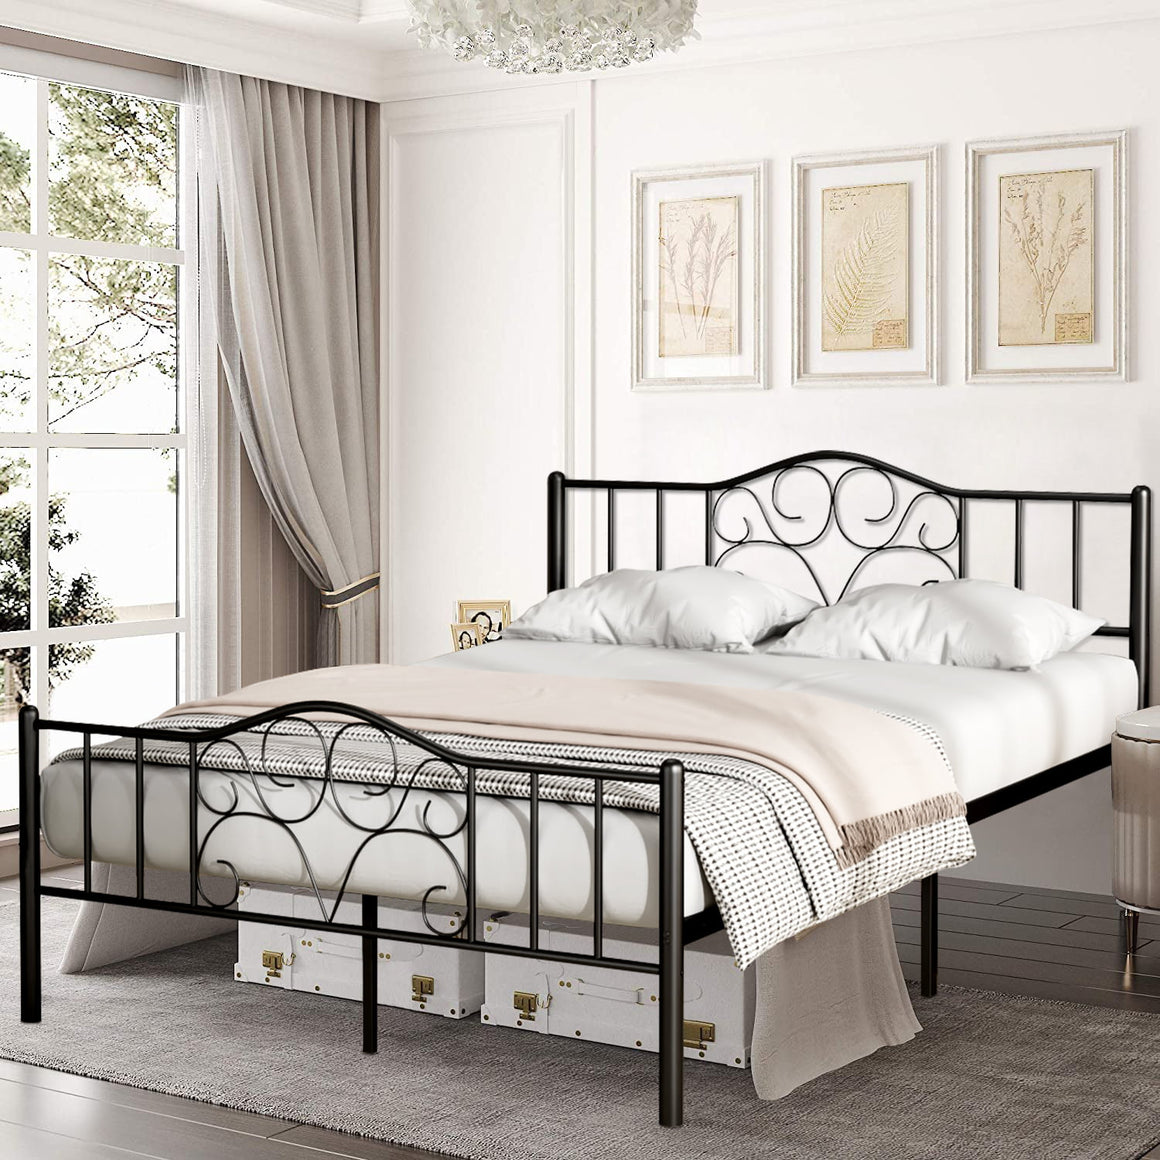 Metal Platform Bed Frame, Queen Bed Frame with Headboard and Footboard, Bed Frame No Box Spring Needed, Queen Size Bed Frame for Kids Adult, Iron Bed Frame for Bedroom Furniture, Black